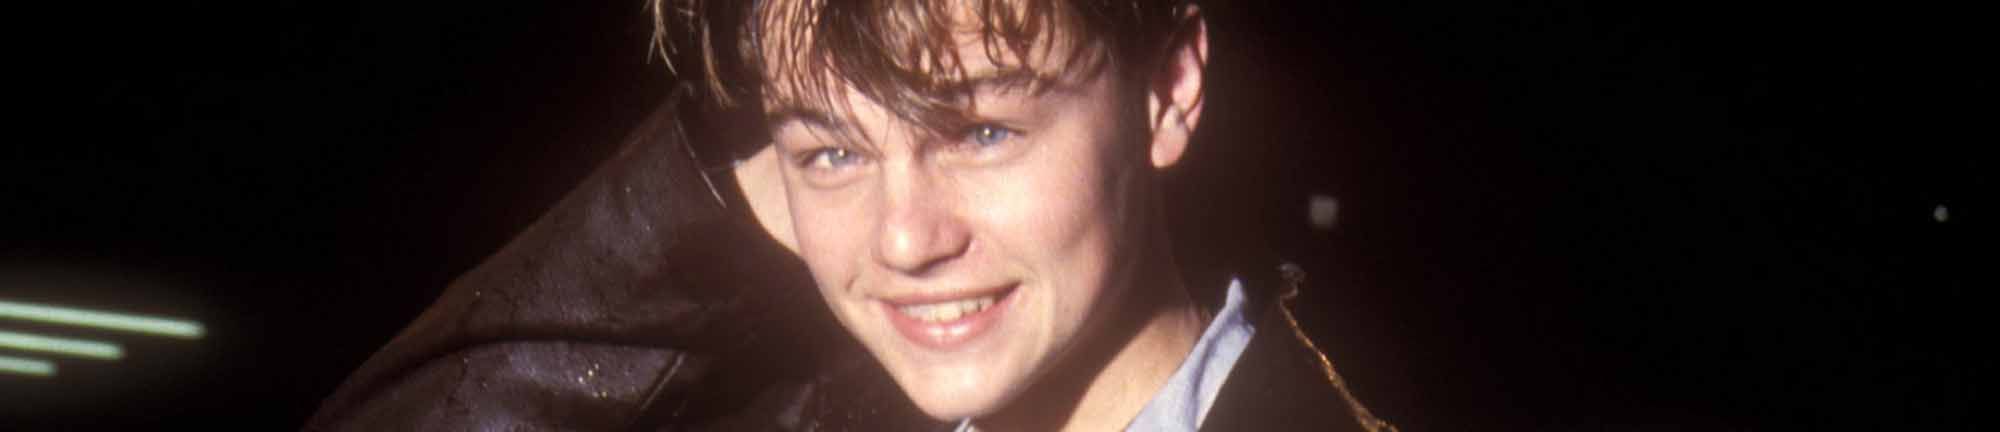 Bullies Helped Young Leonardo DiCaprio Become An Actor?